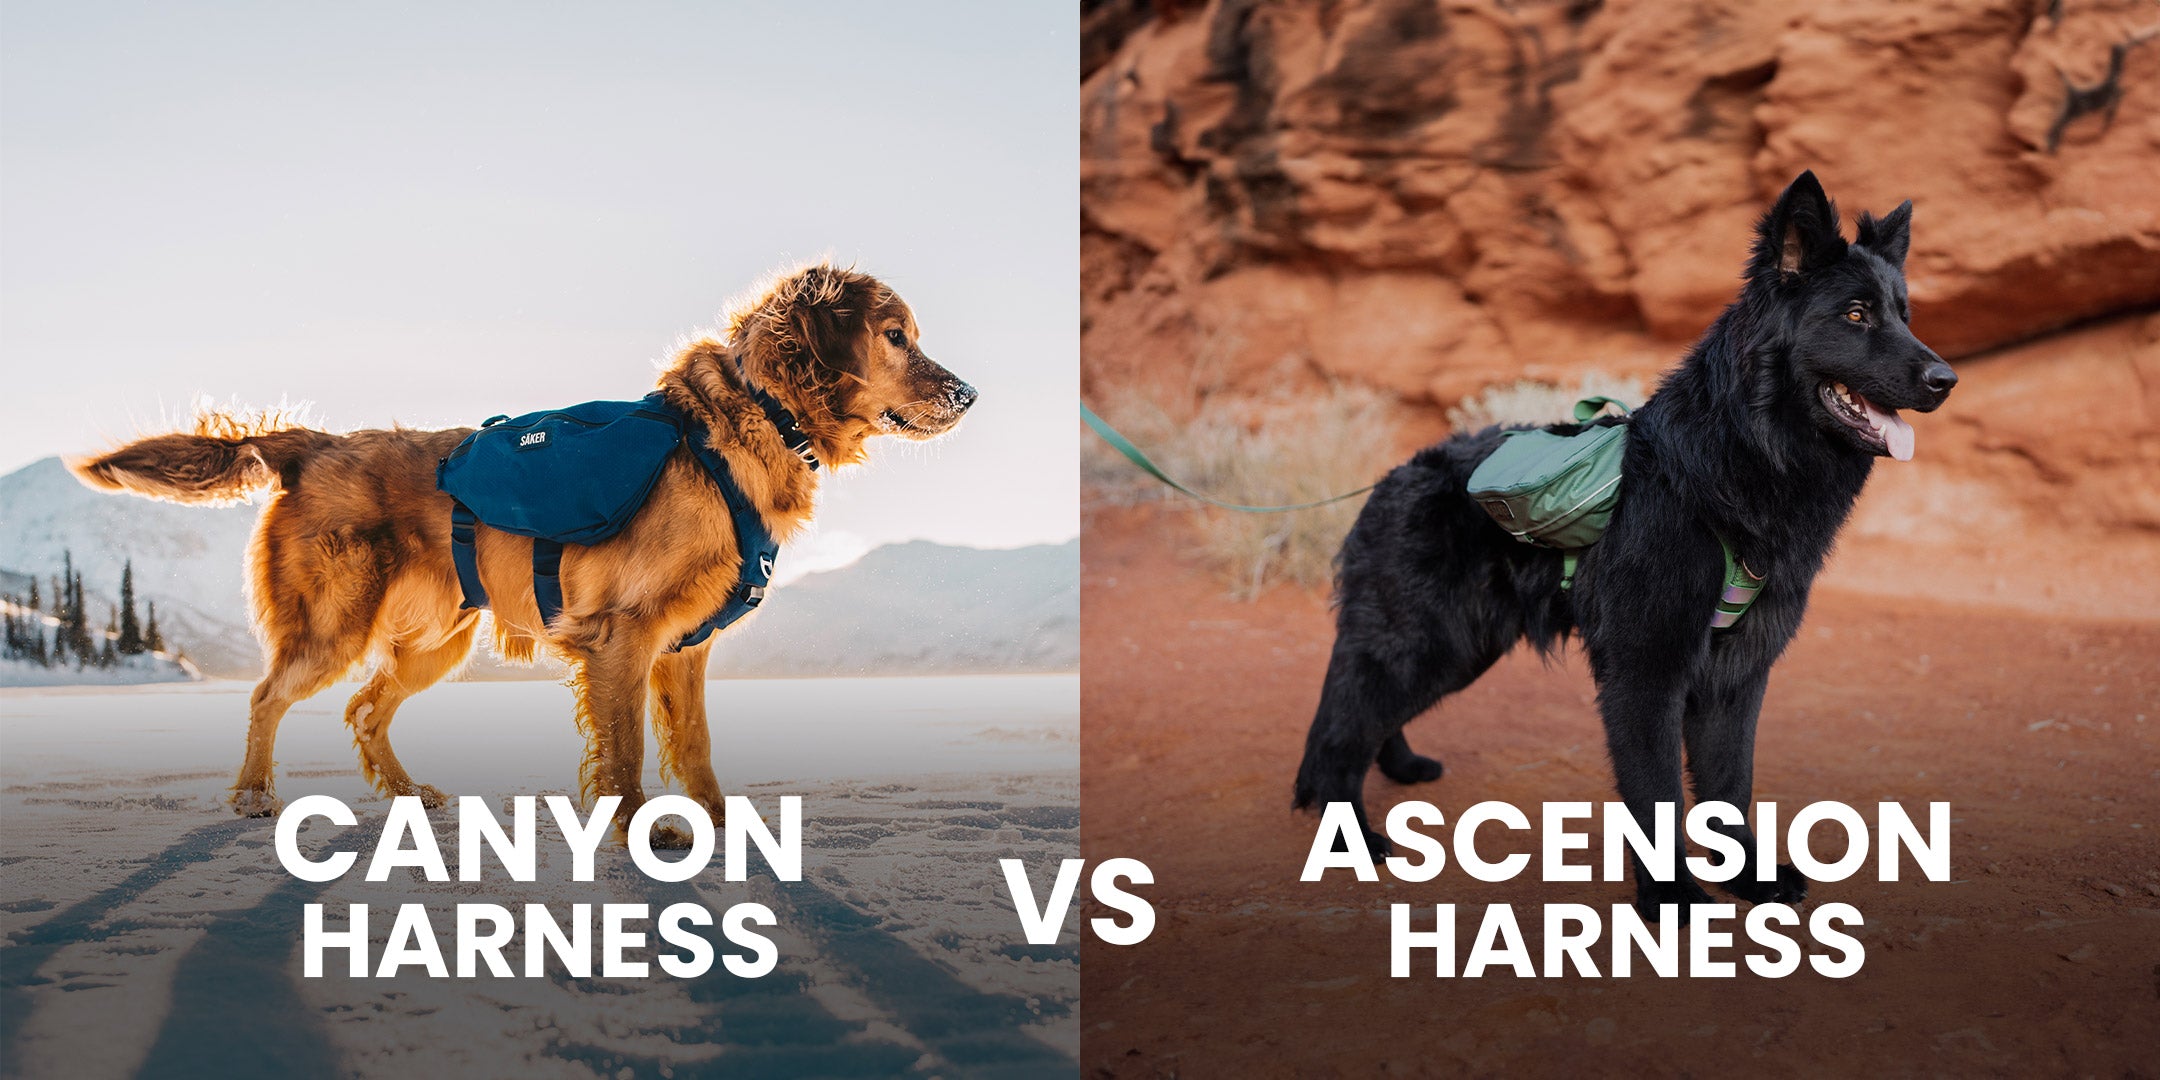 Canyon harness vs Ascension harness